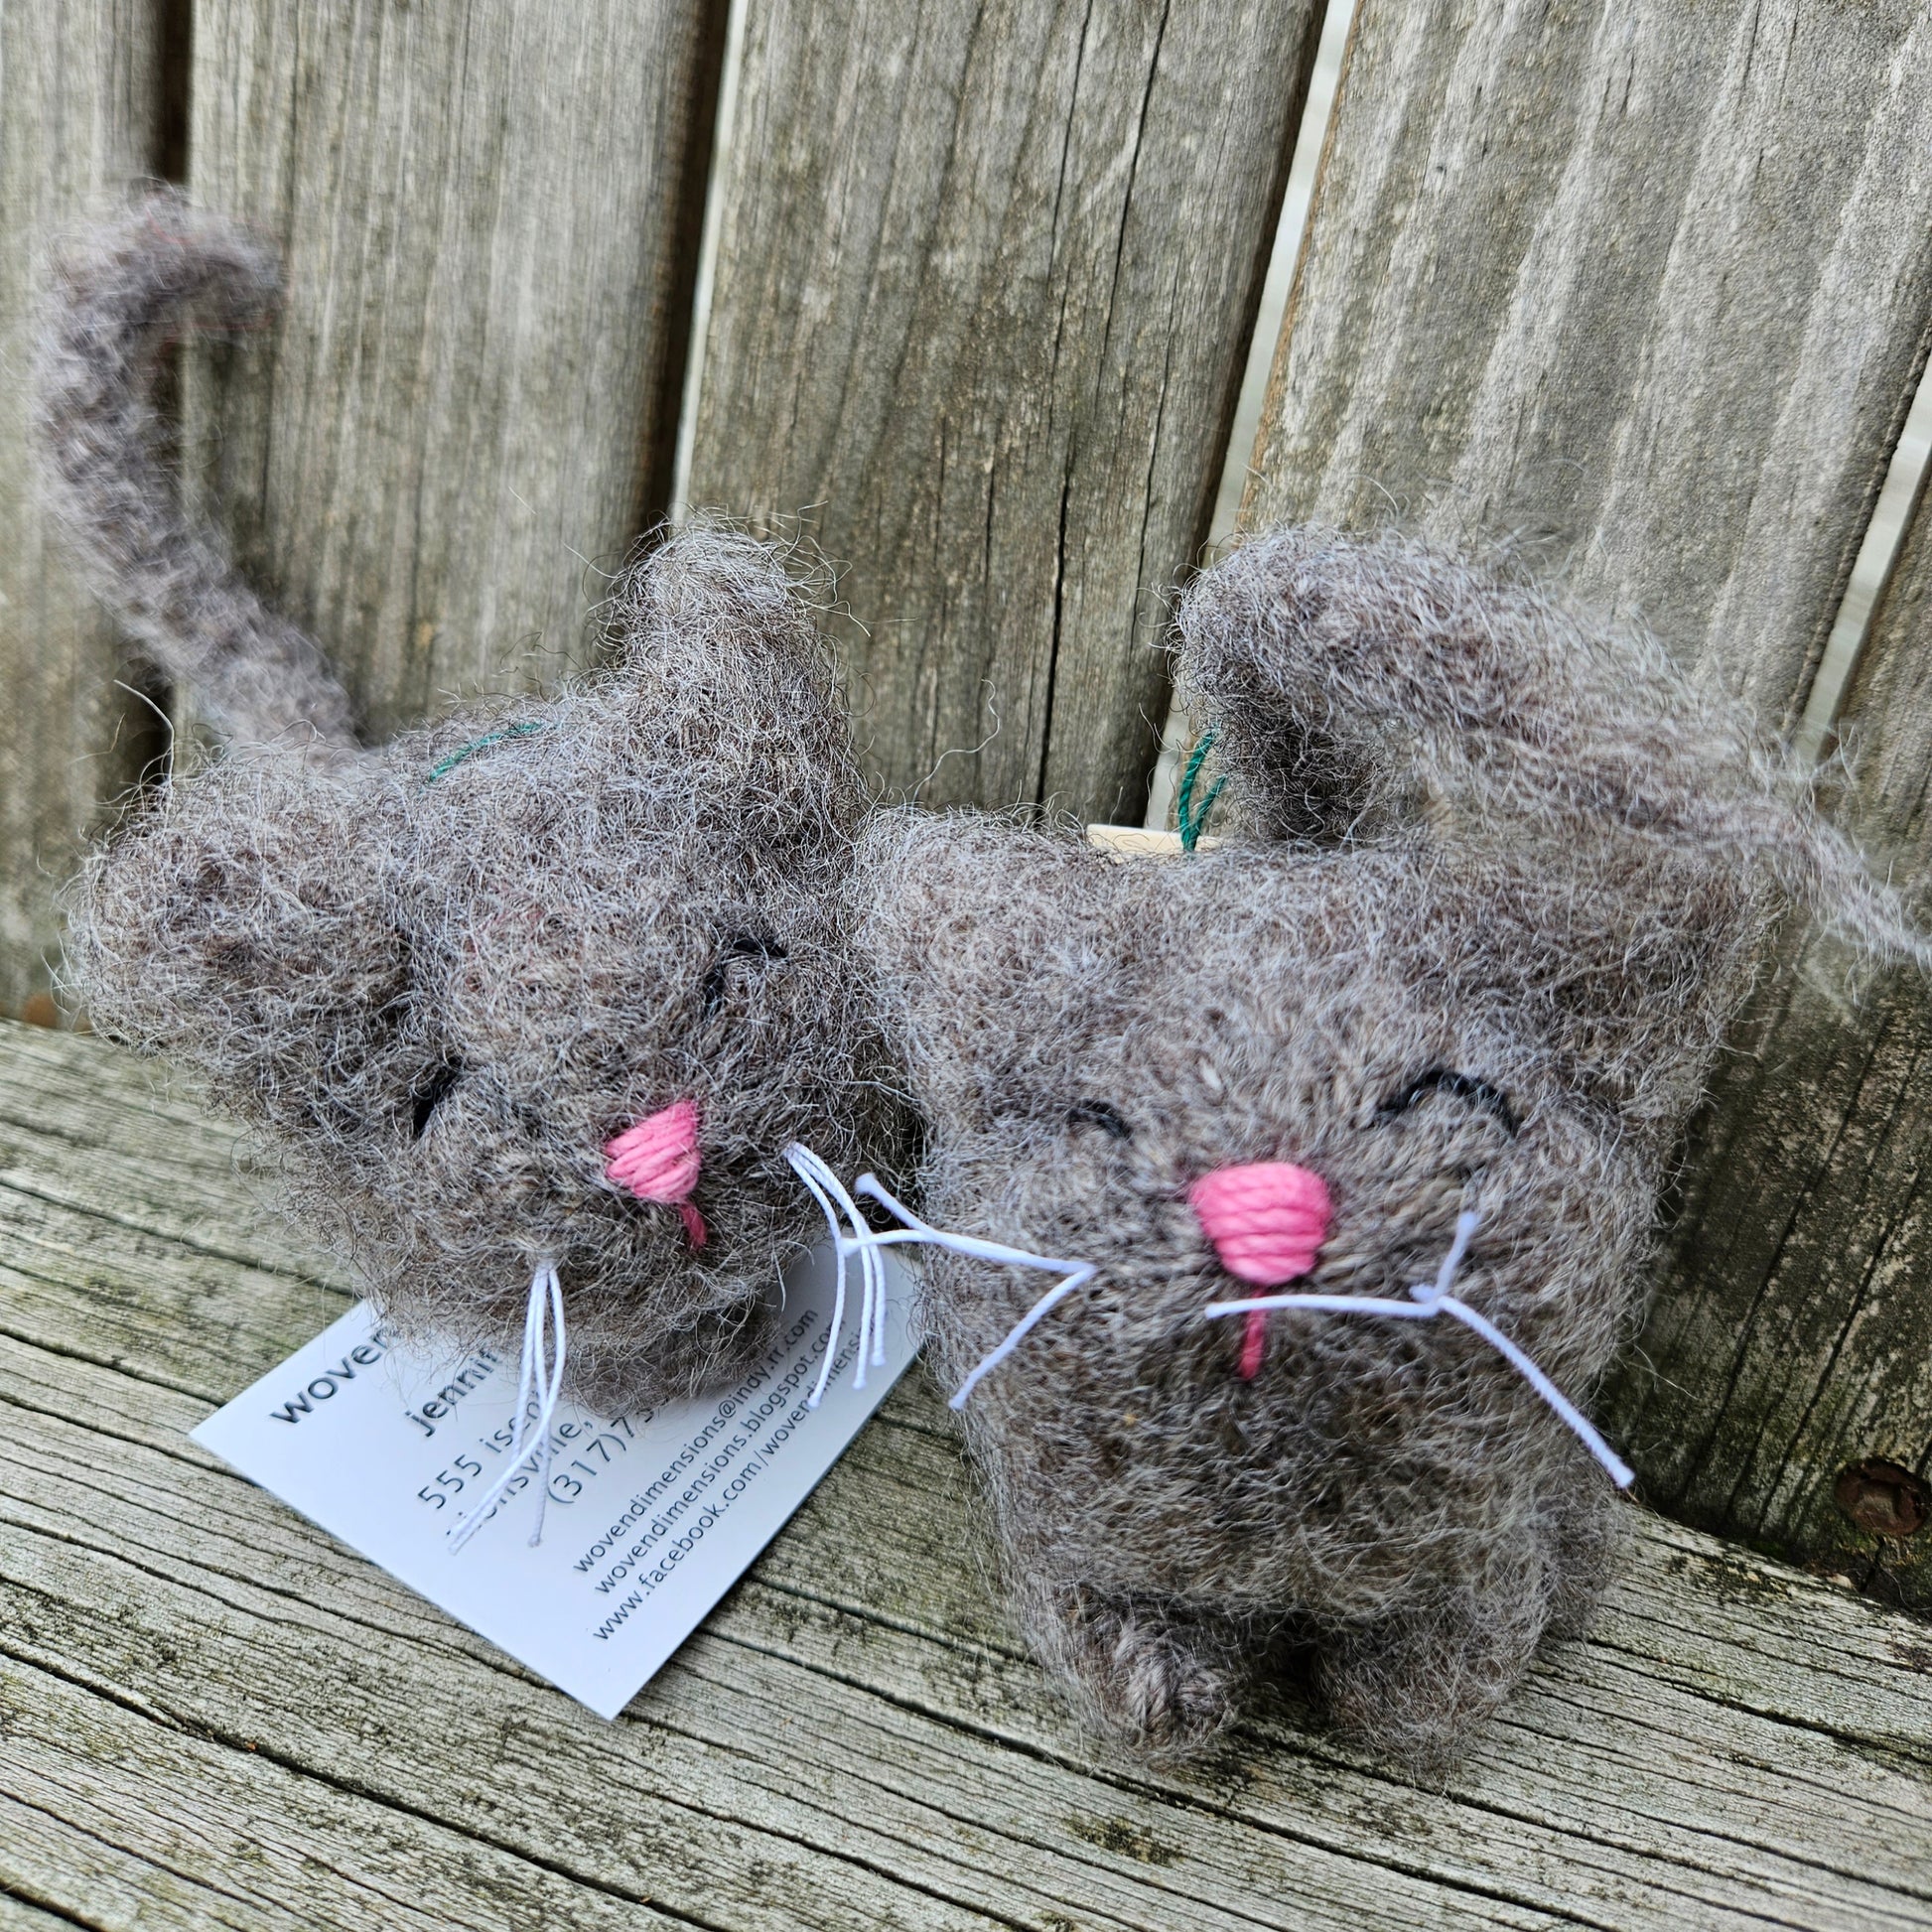 Felted Gray Tabby cat knitted with 3LS Romney Silver Gray yarn  at Woven Dimensions